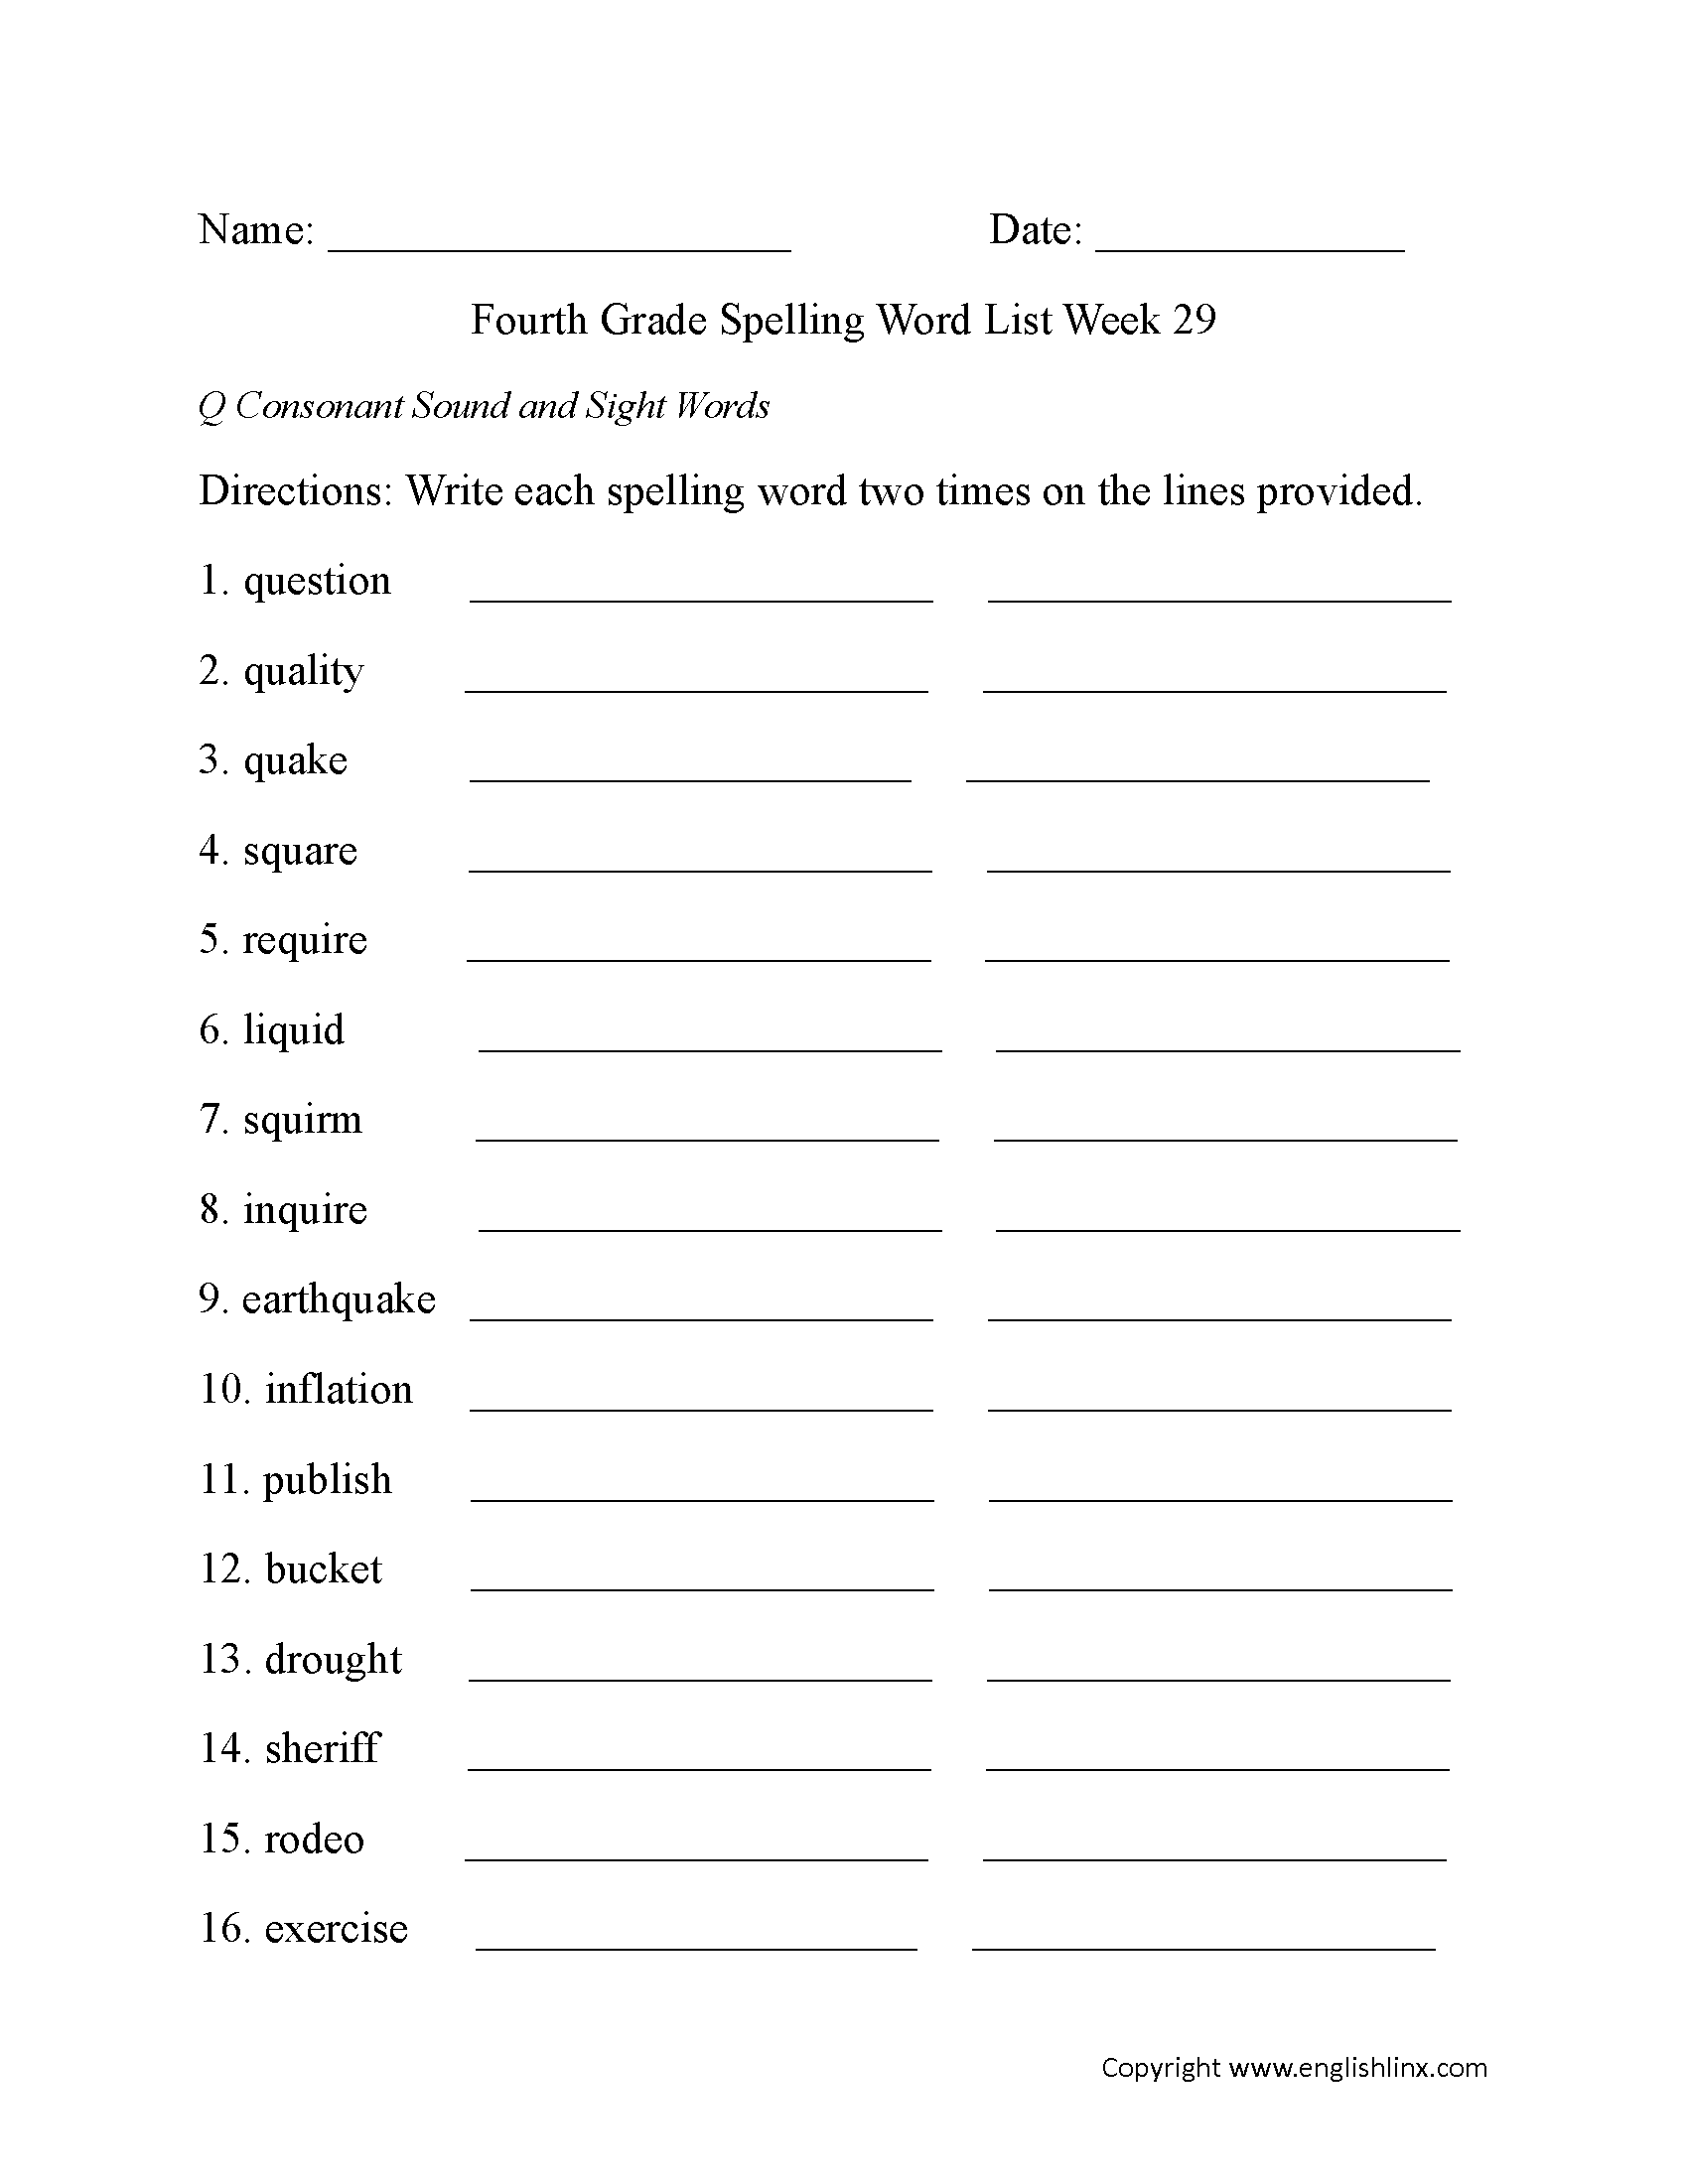 Week 29 Q Consonant and Sight Words Fourth Grade Spelling Words Worksheets